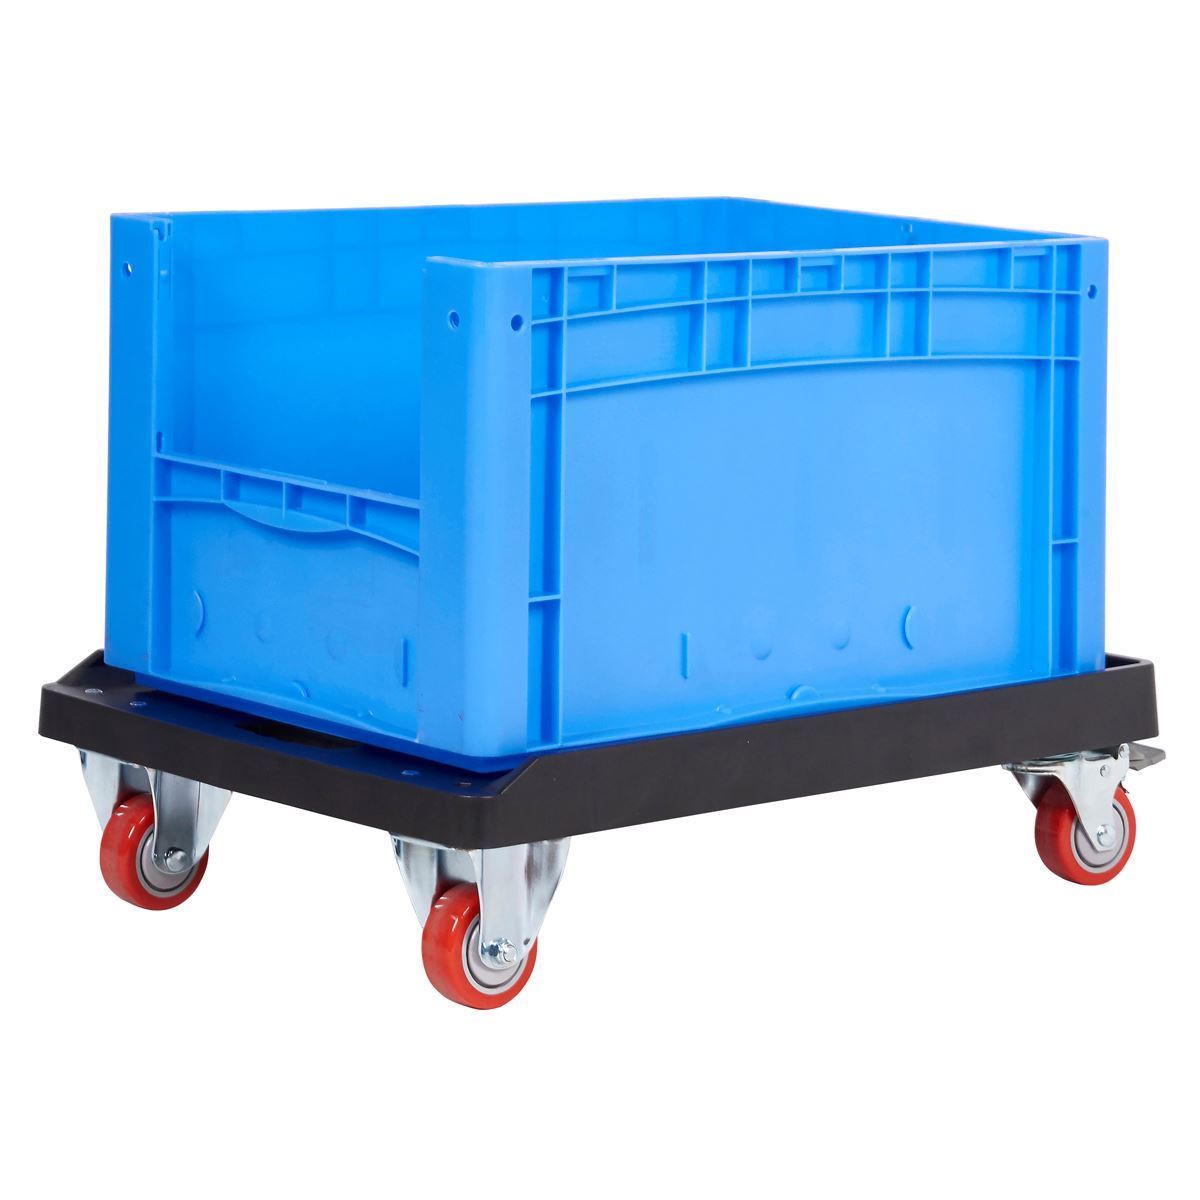 300Kg 600 x 400mm Blue Euro Container Dolly/Skate with Large Load capacity 